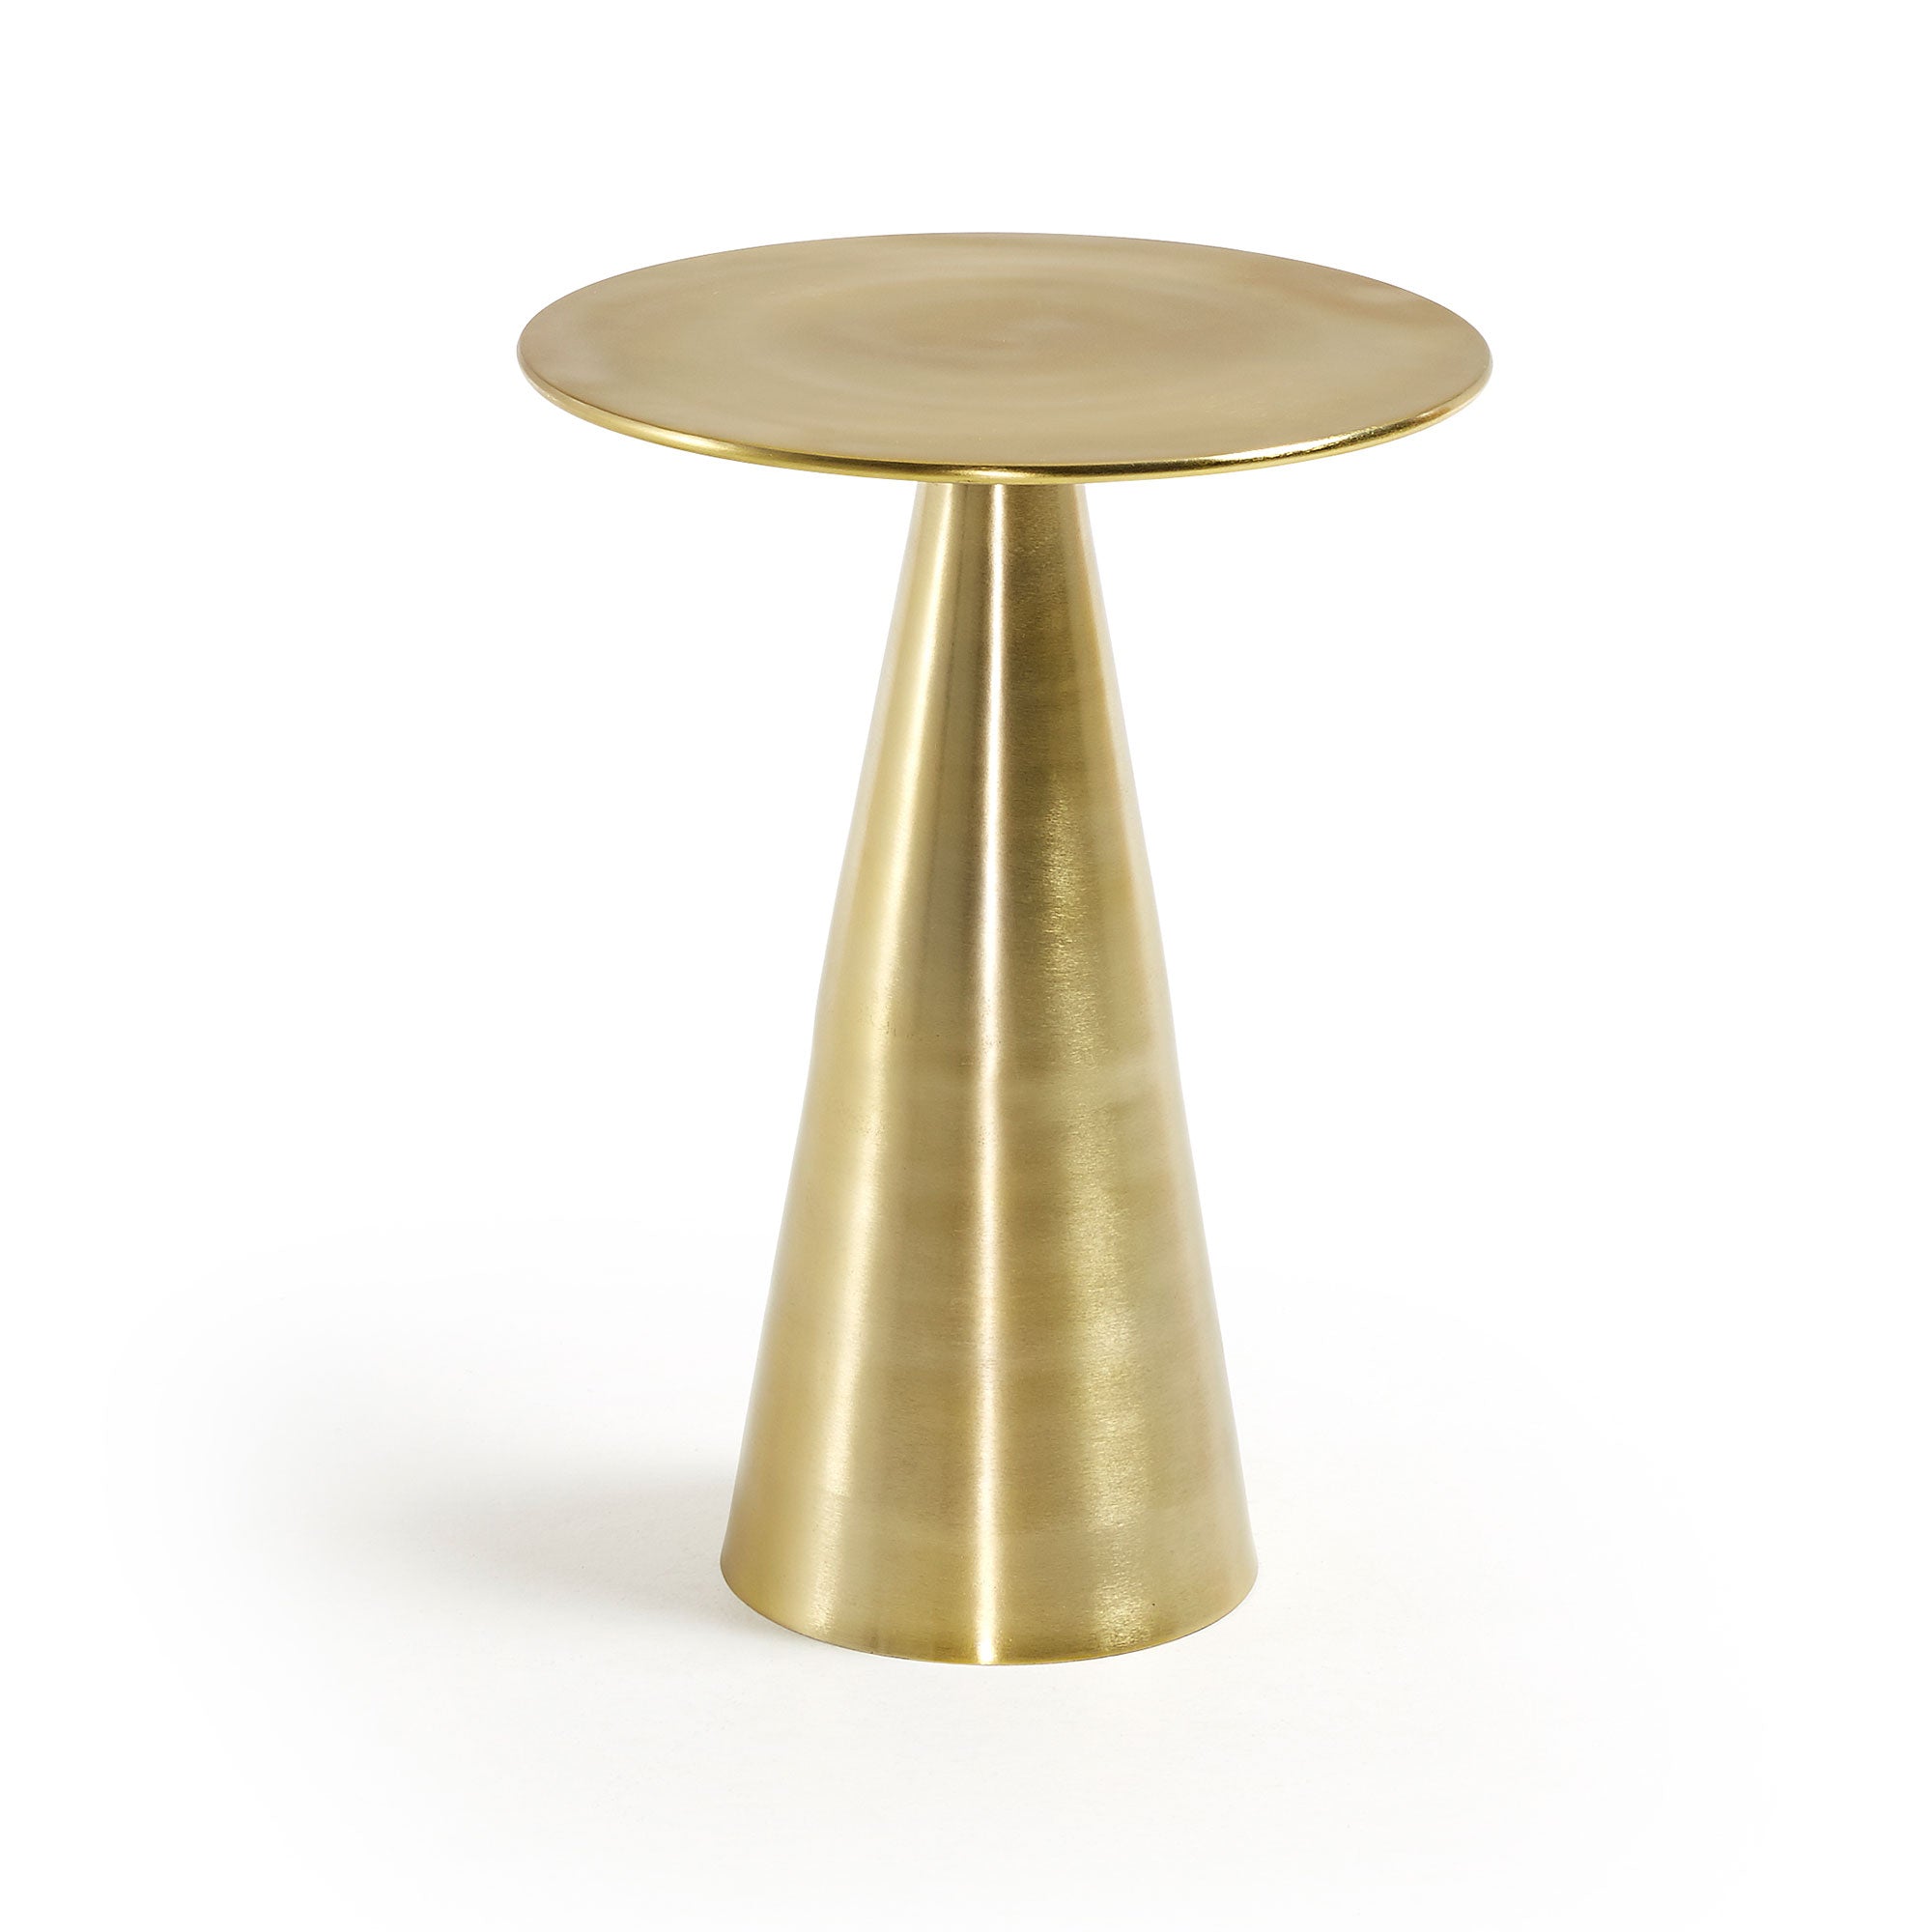 Rhet metal side table with gold finish, Ø 39 cm